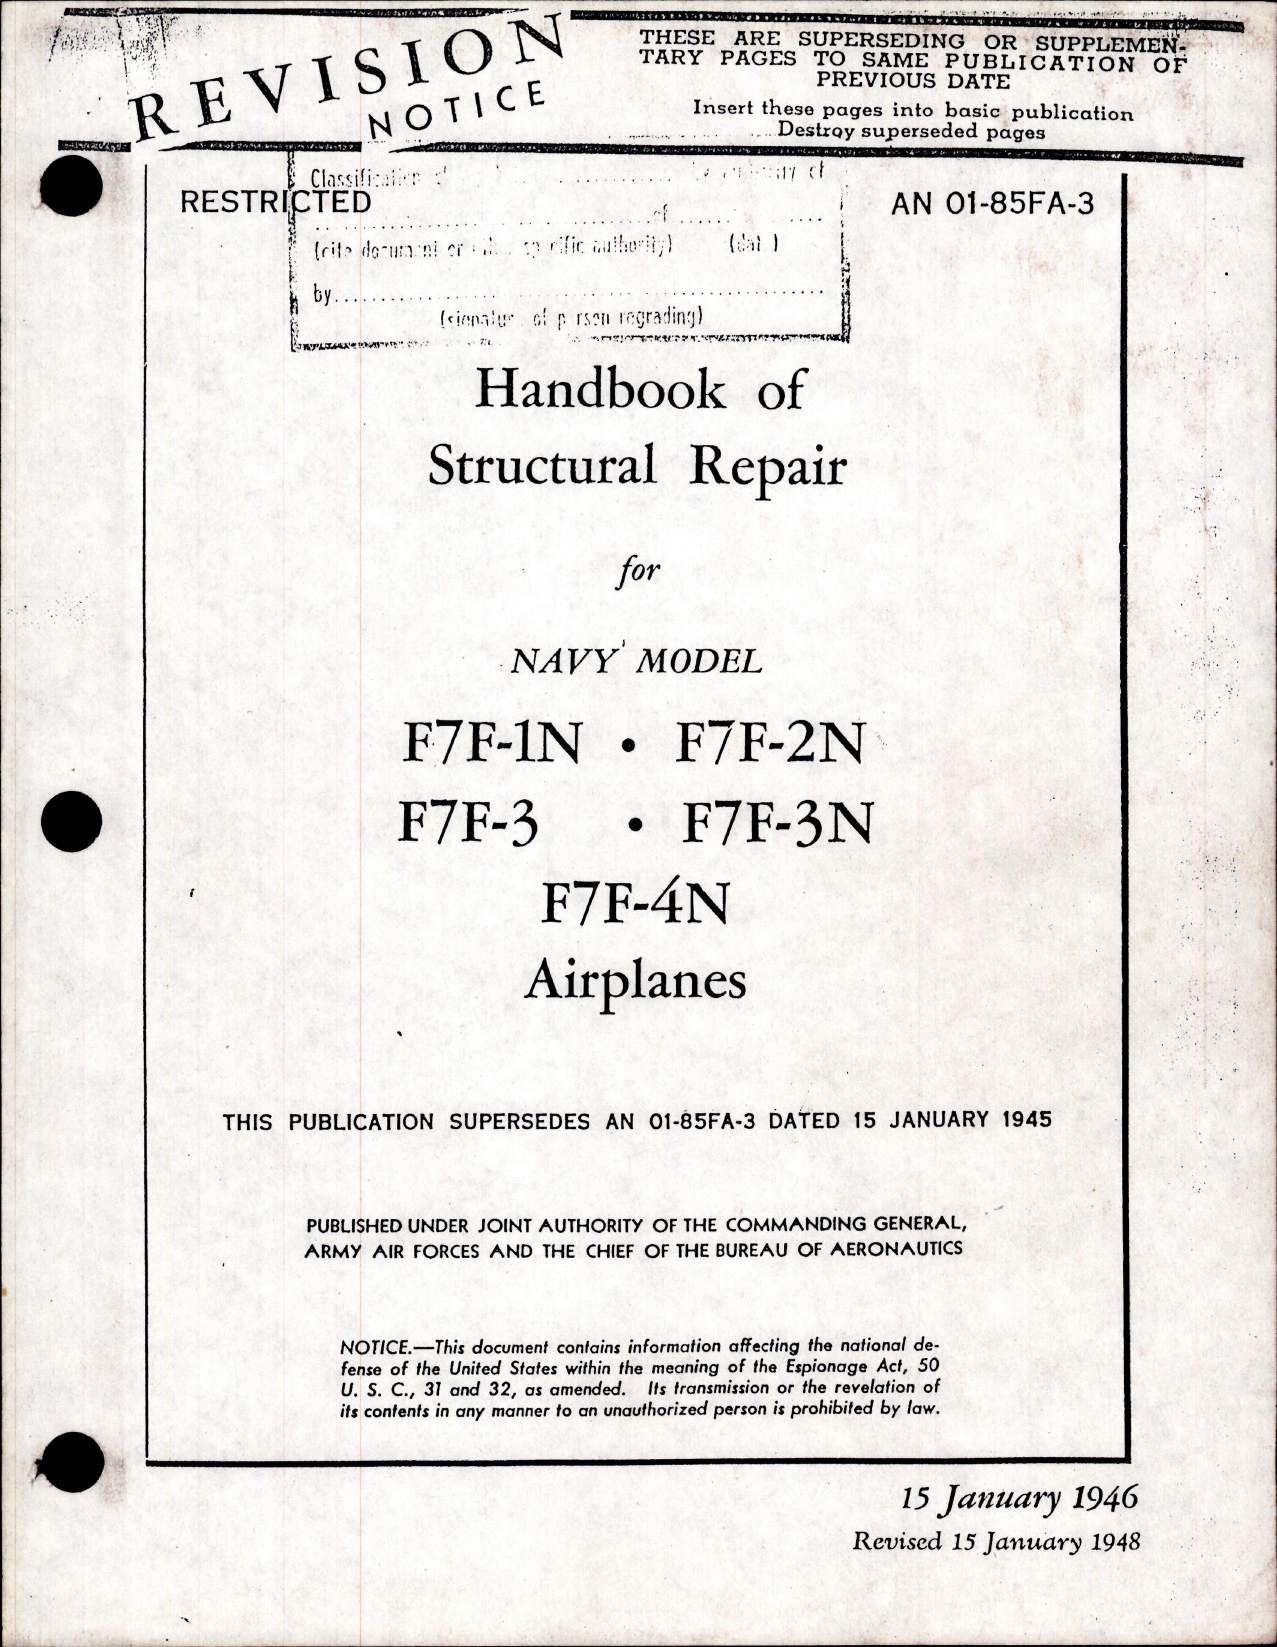 Sample page 1 from AirCorps Library document: Structural Repair Instructions for F7F-1N, F7F-2N, F7F-3, F7F-3N, and F7F-4N